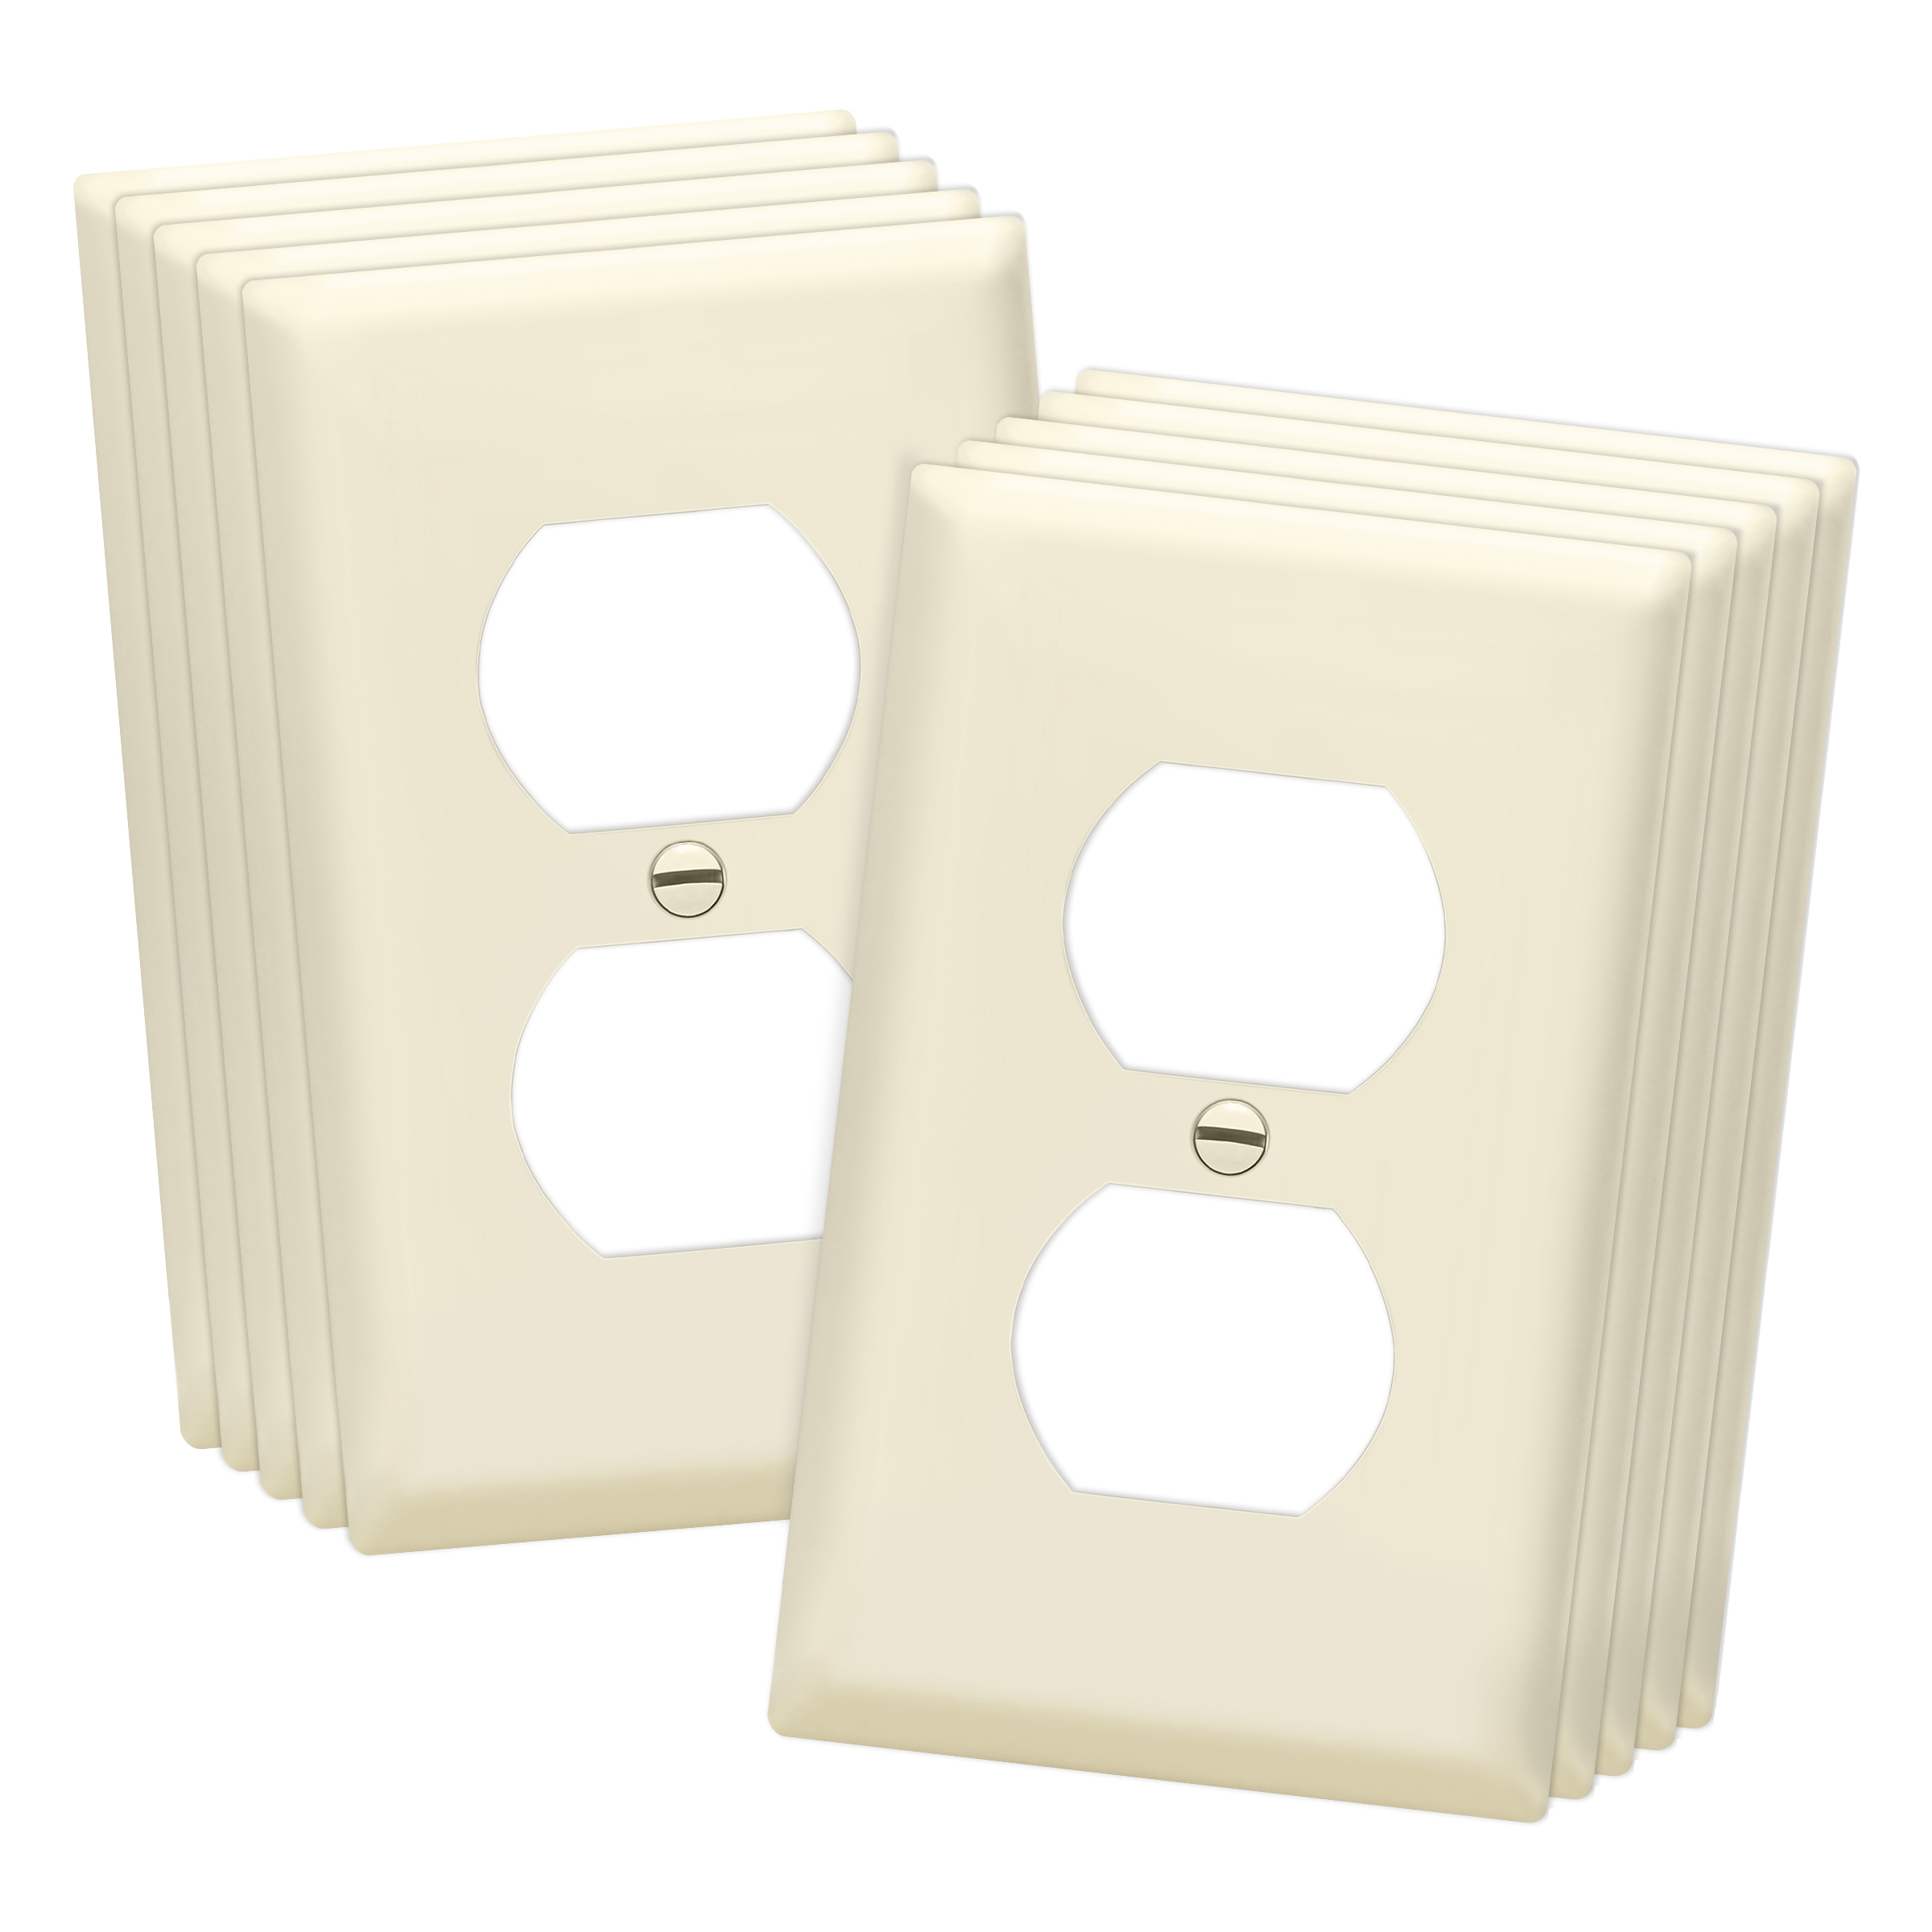 ENERLITES Duplex Receptacle Outlet Wall Plate, Size 1-Gang 4.50" x 2.76", Unbreakable Polycarbonate Thermoplastic, UL Listed, 8821-LA-10PCS, Light Almond (10 Pack) - image 1 of 5